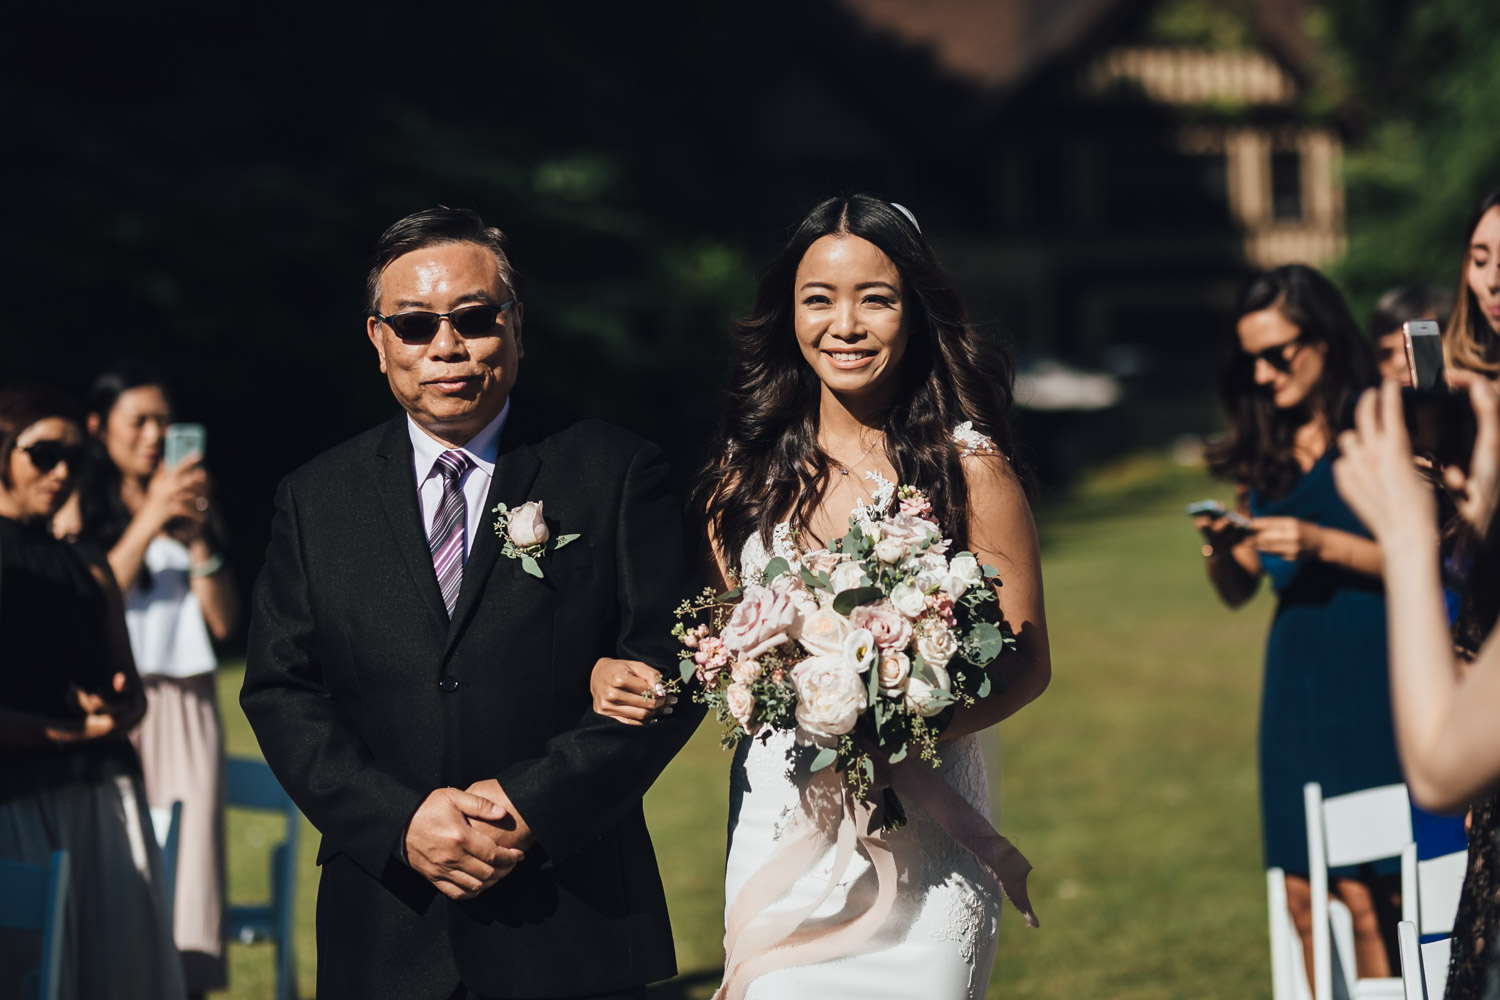 hart house restaurant wedding ceremony in vancouver bc